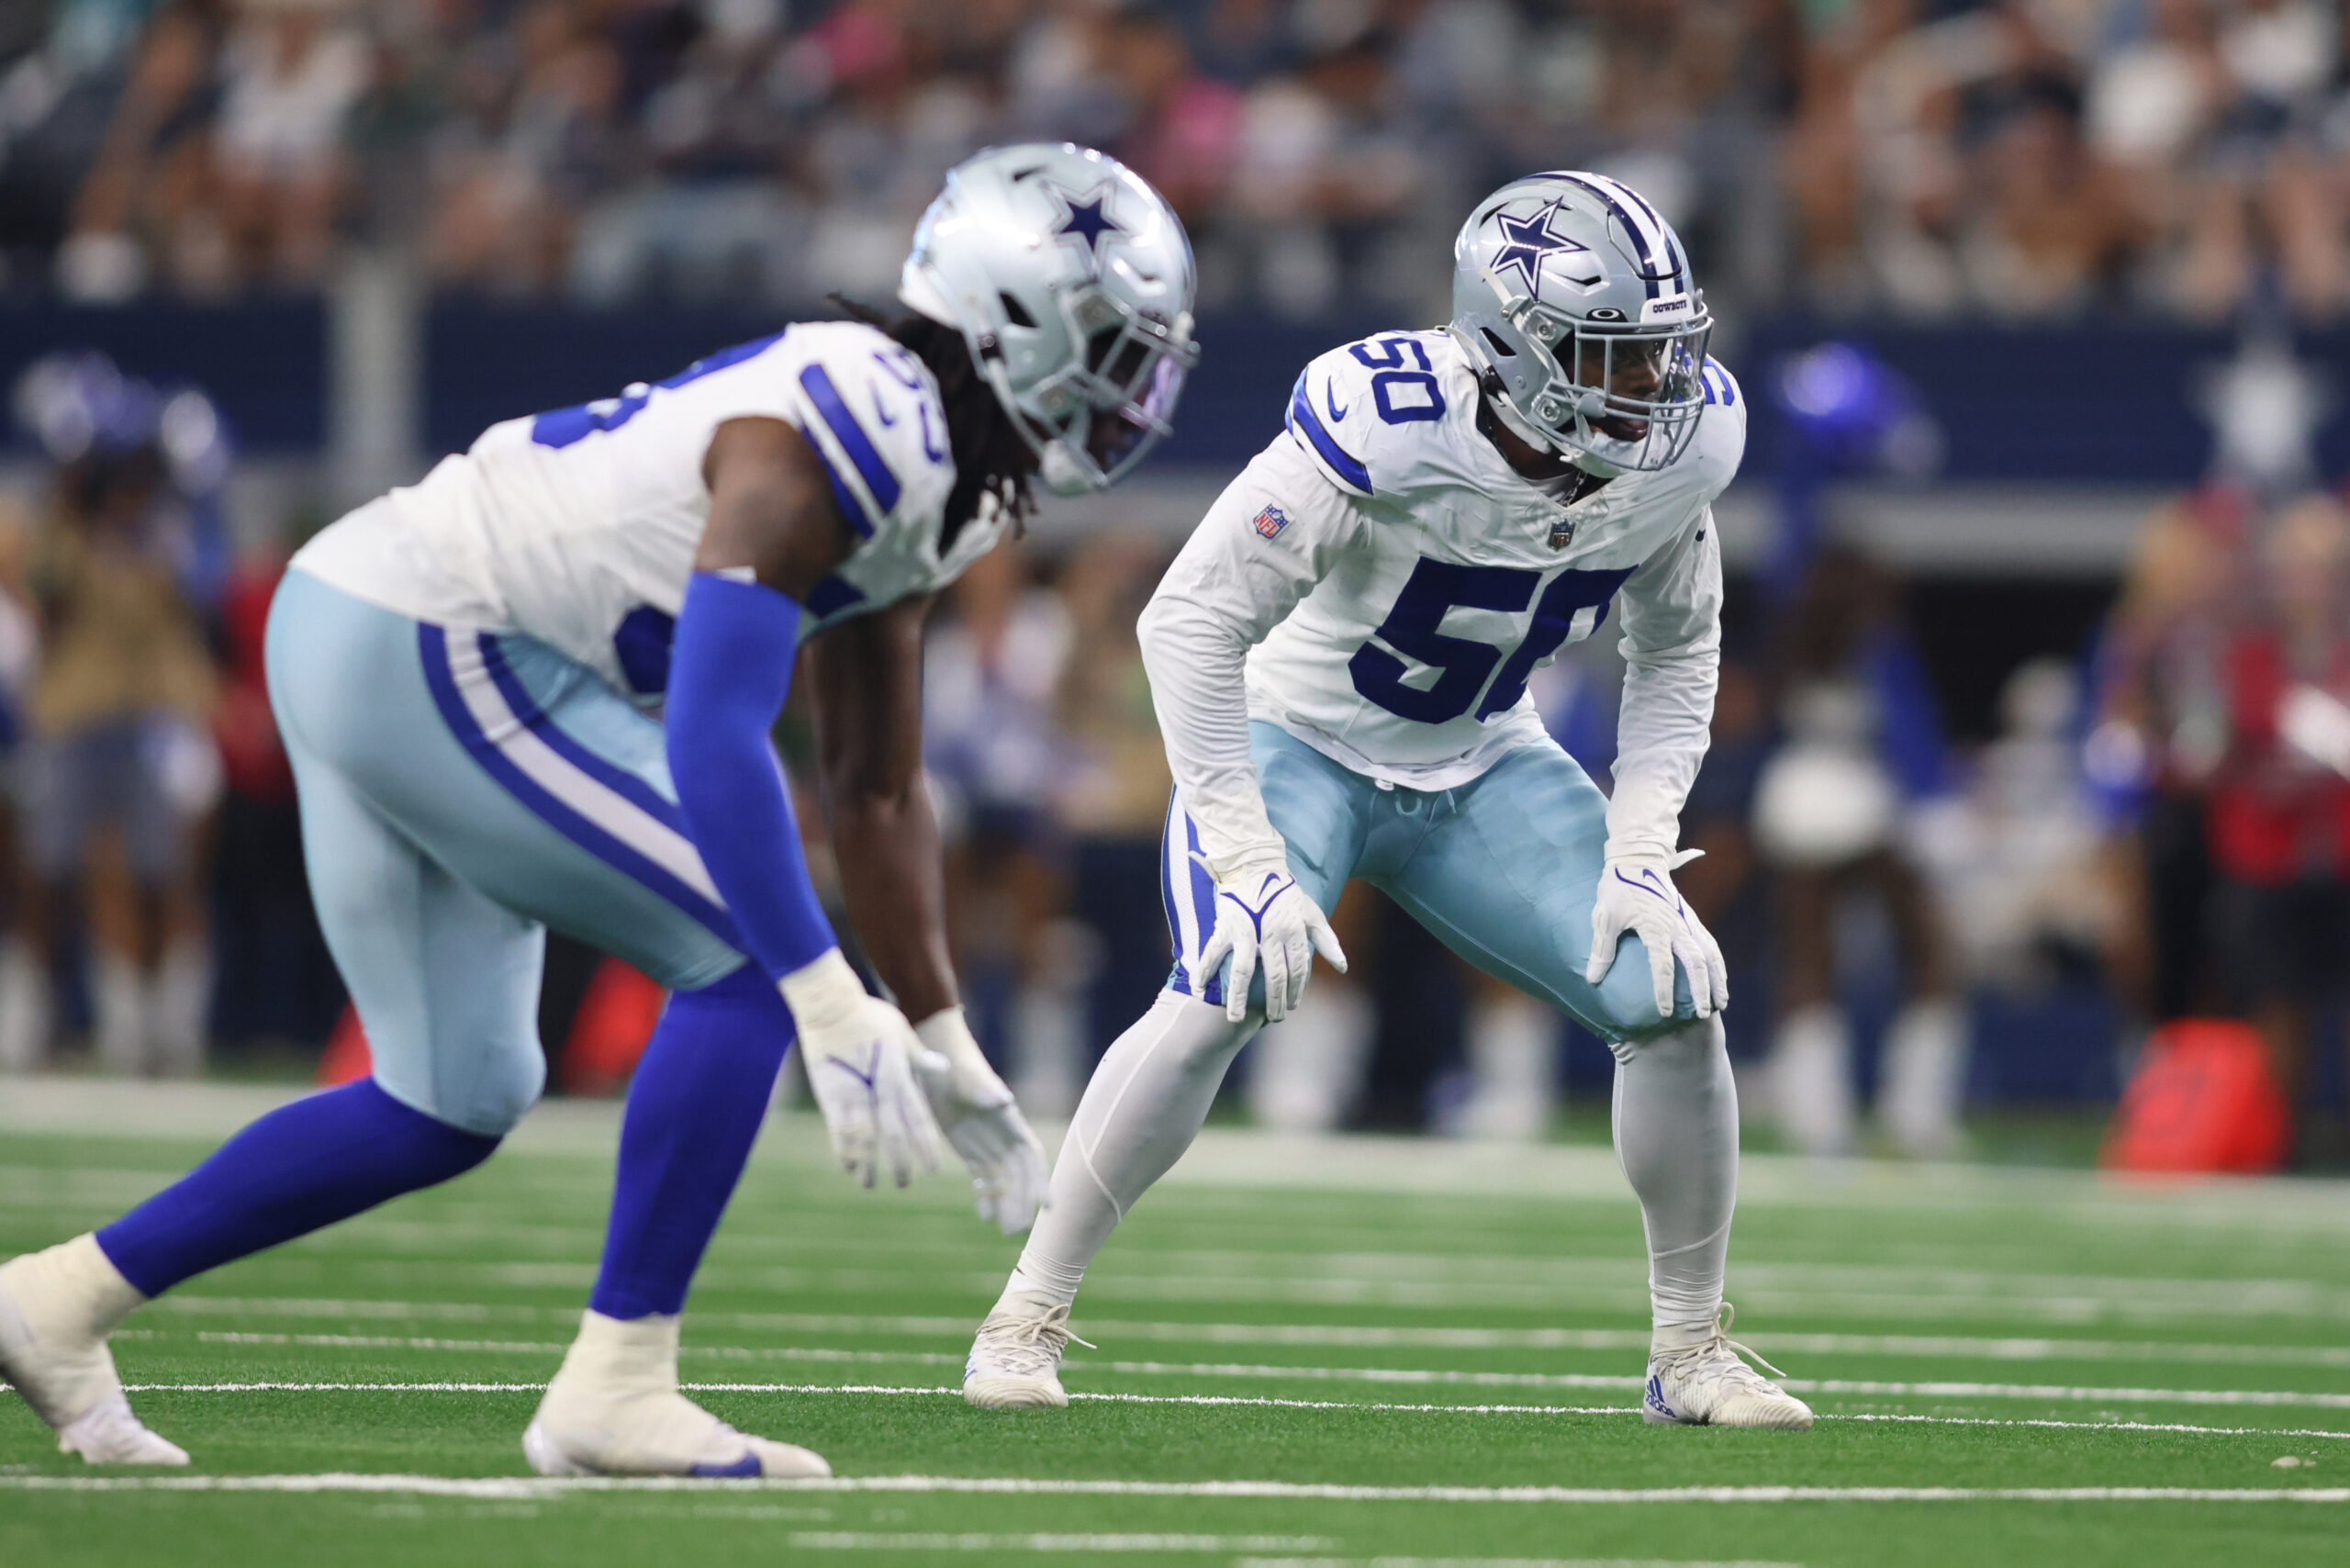 Doomsday Return? Dallas Cowboys Defense 'Wanted to Put Out a